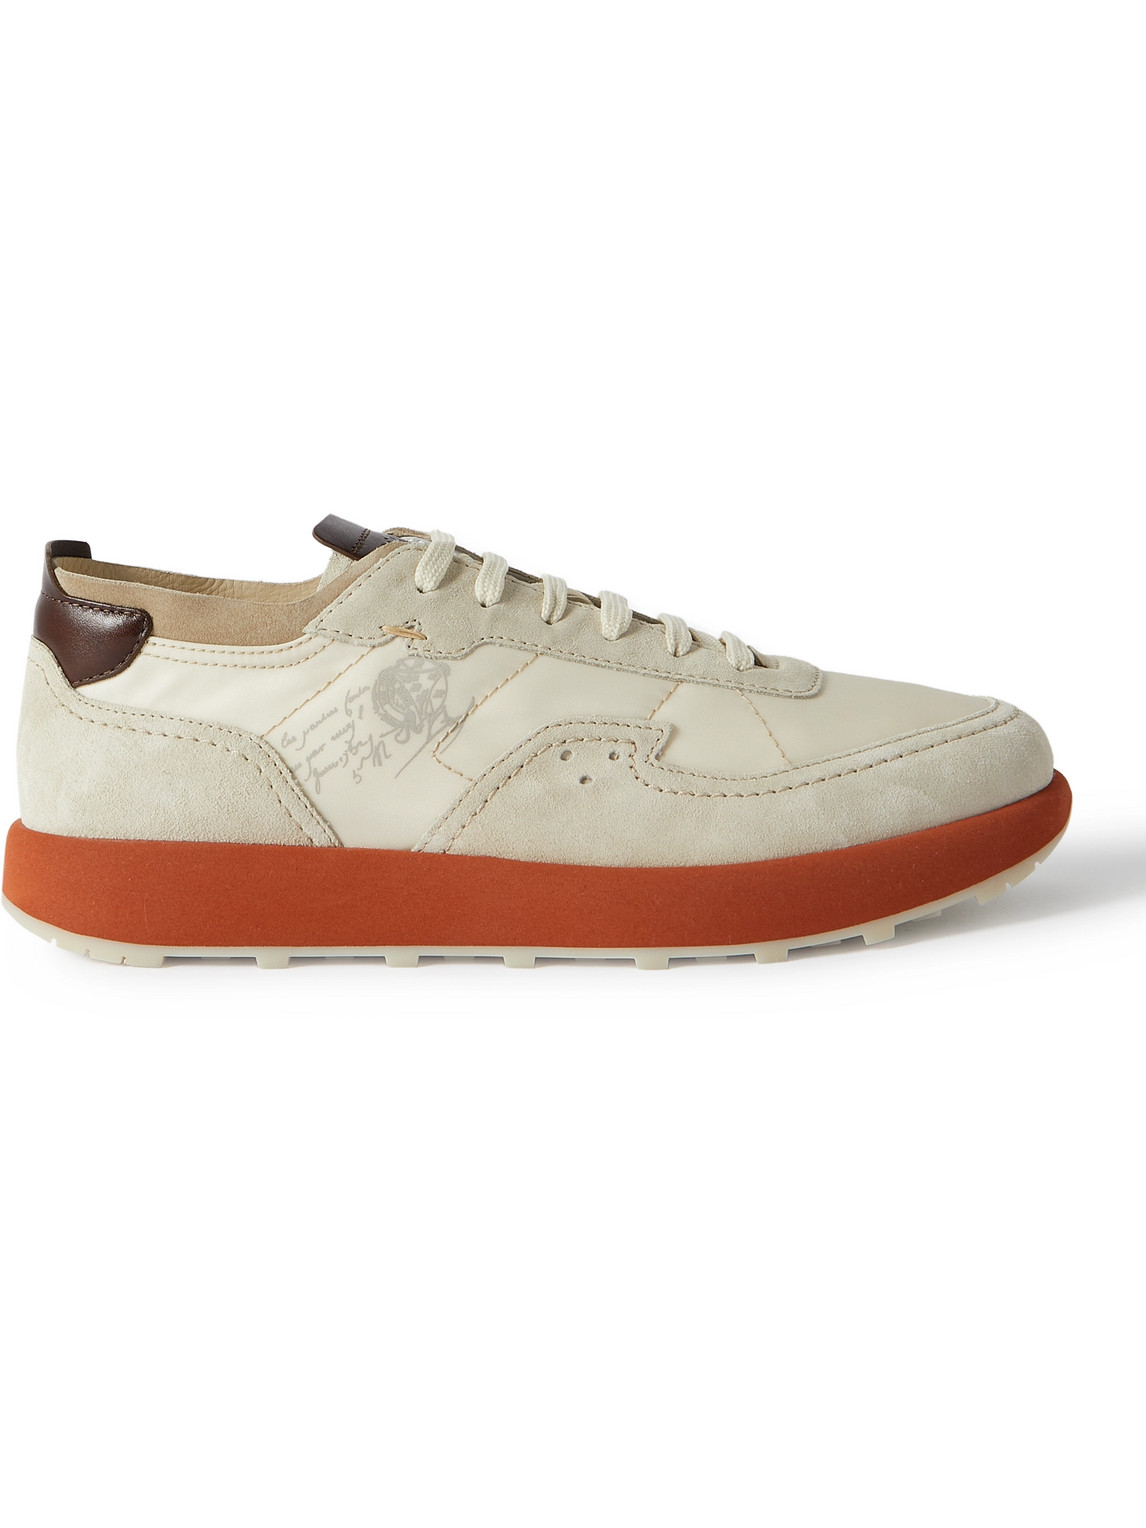 Light Track Venezia Leather and Suede-Trimmed Mesh Sneakers